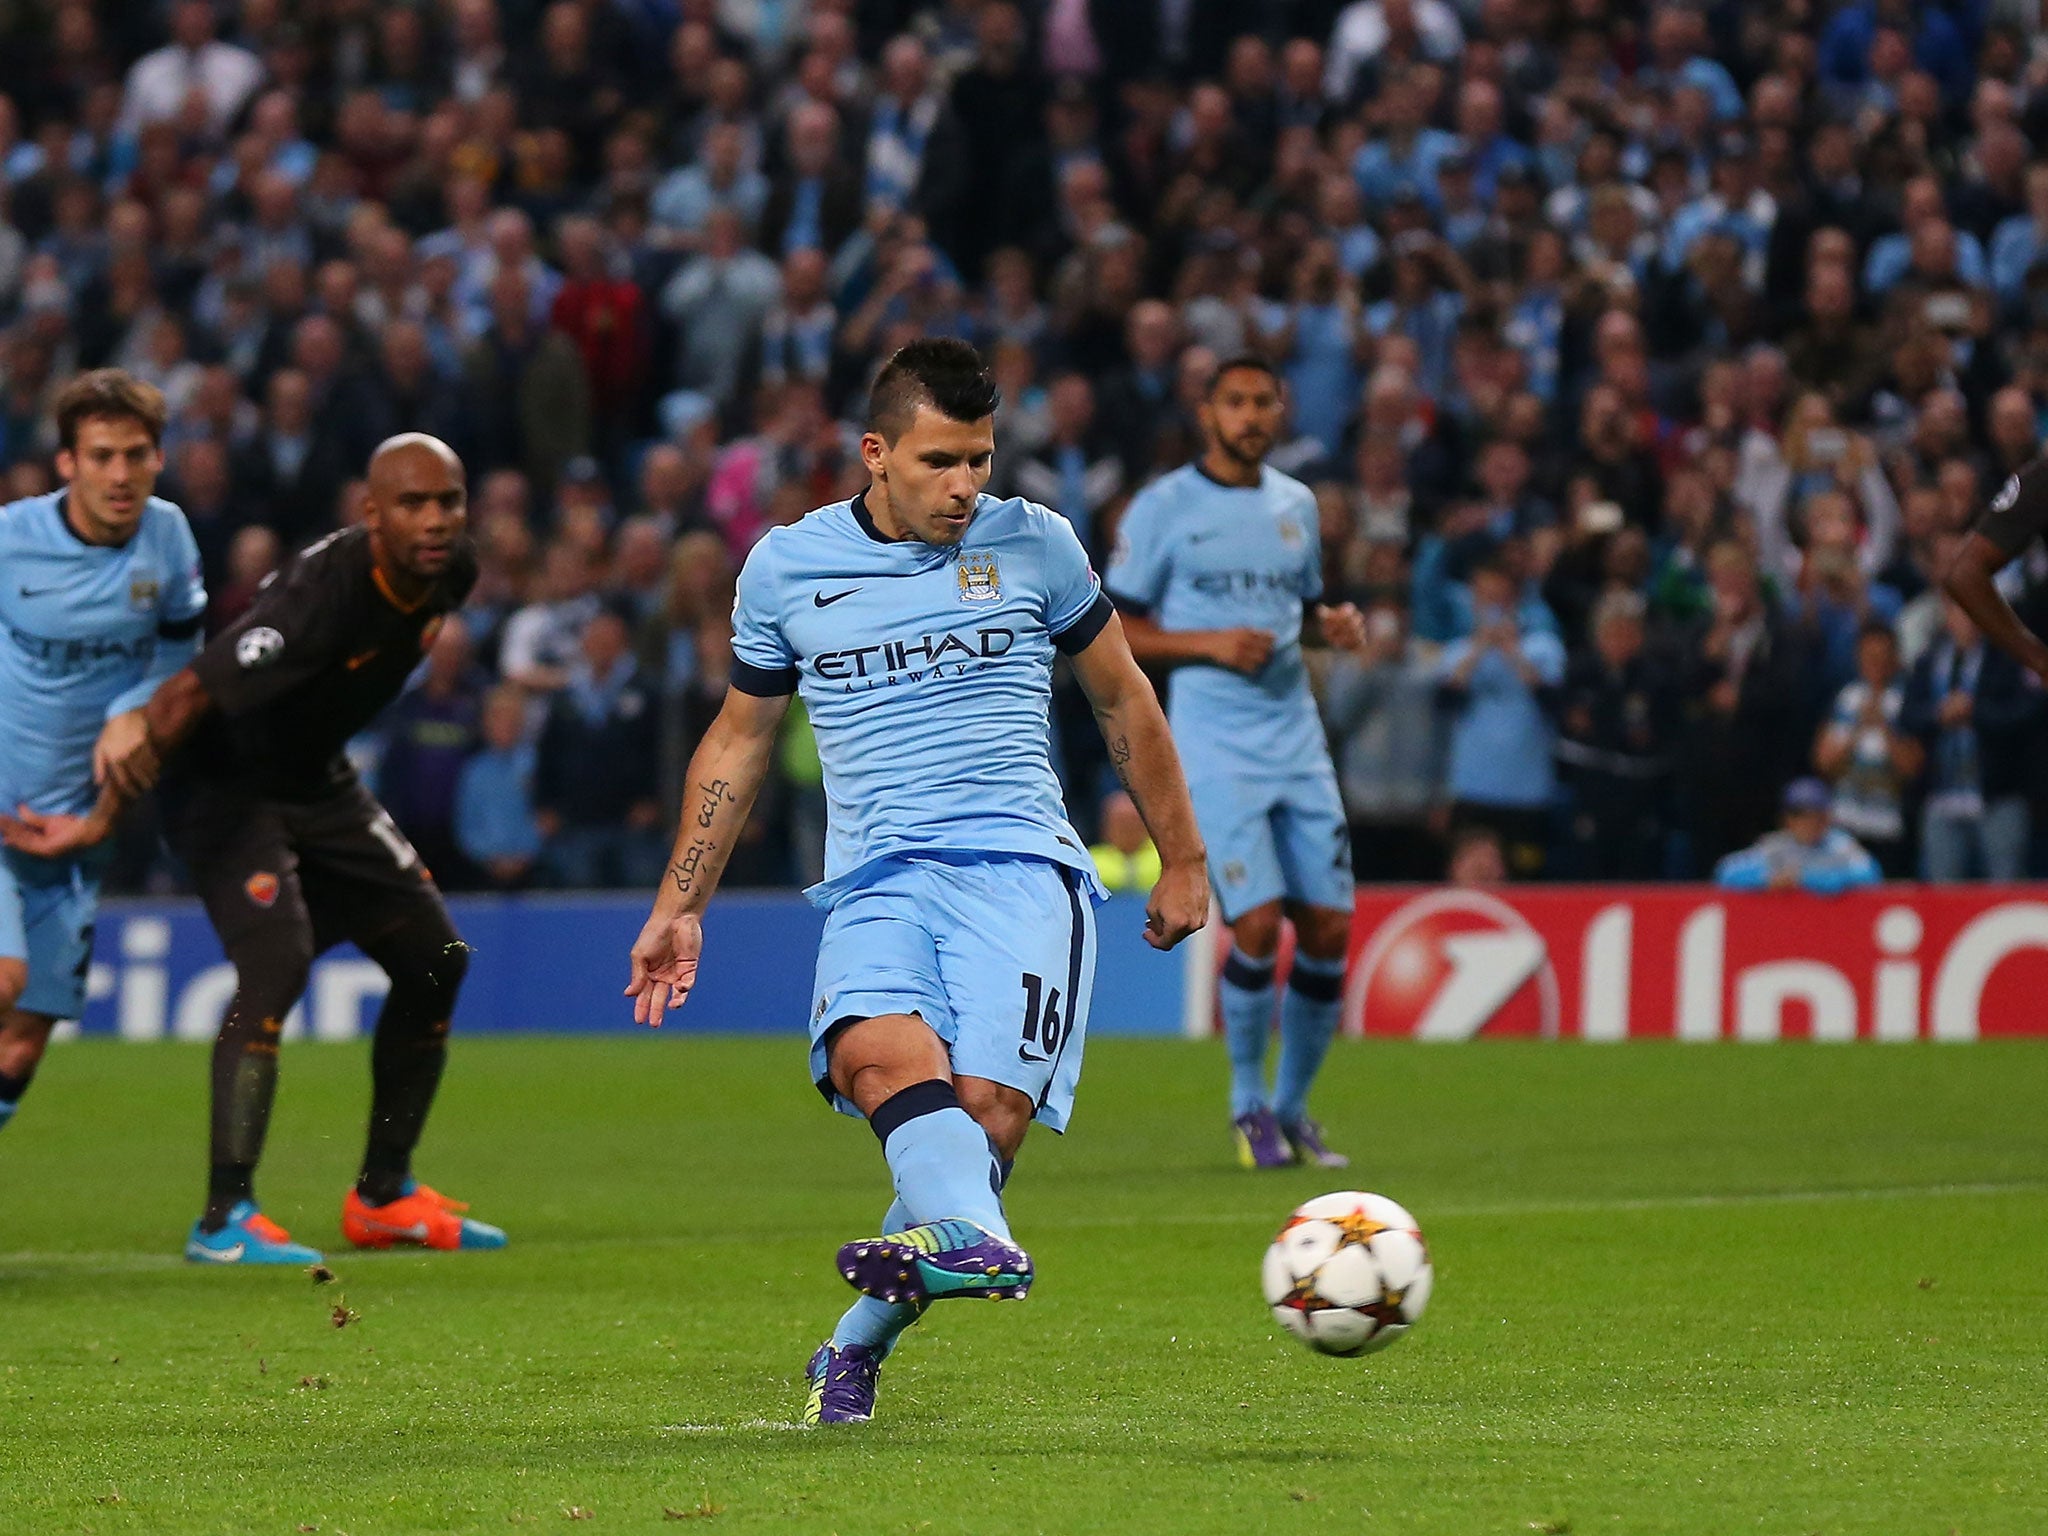 A bundle of energy up front, Aguero was let down by a lack of service, though he slotted his penalty away confidently. 6